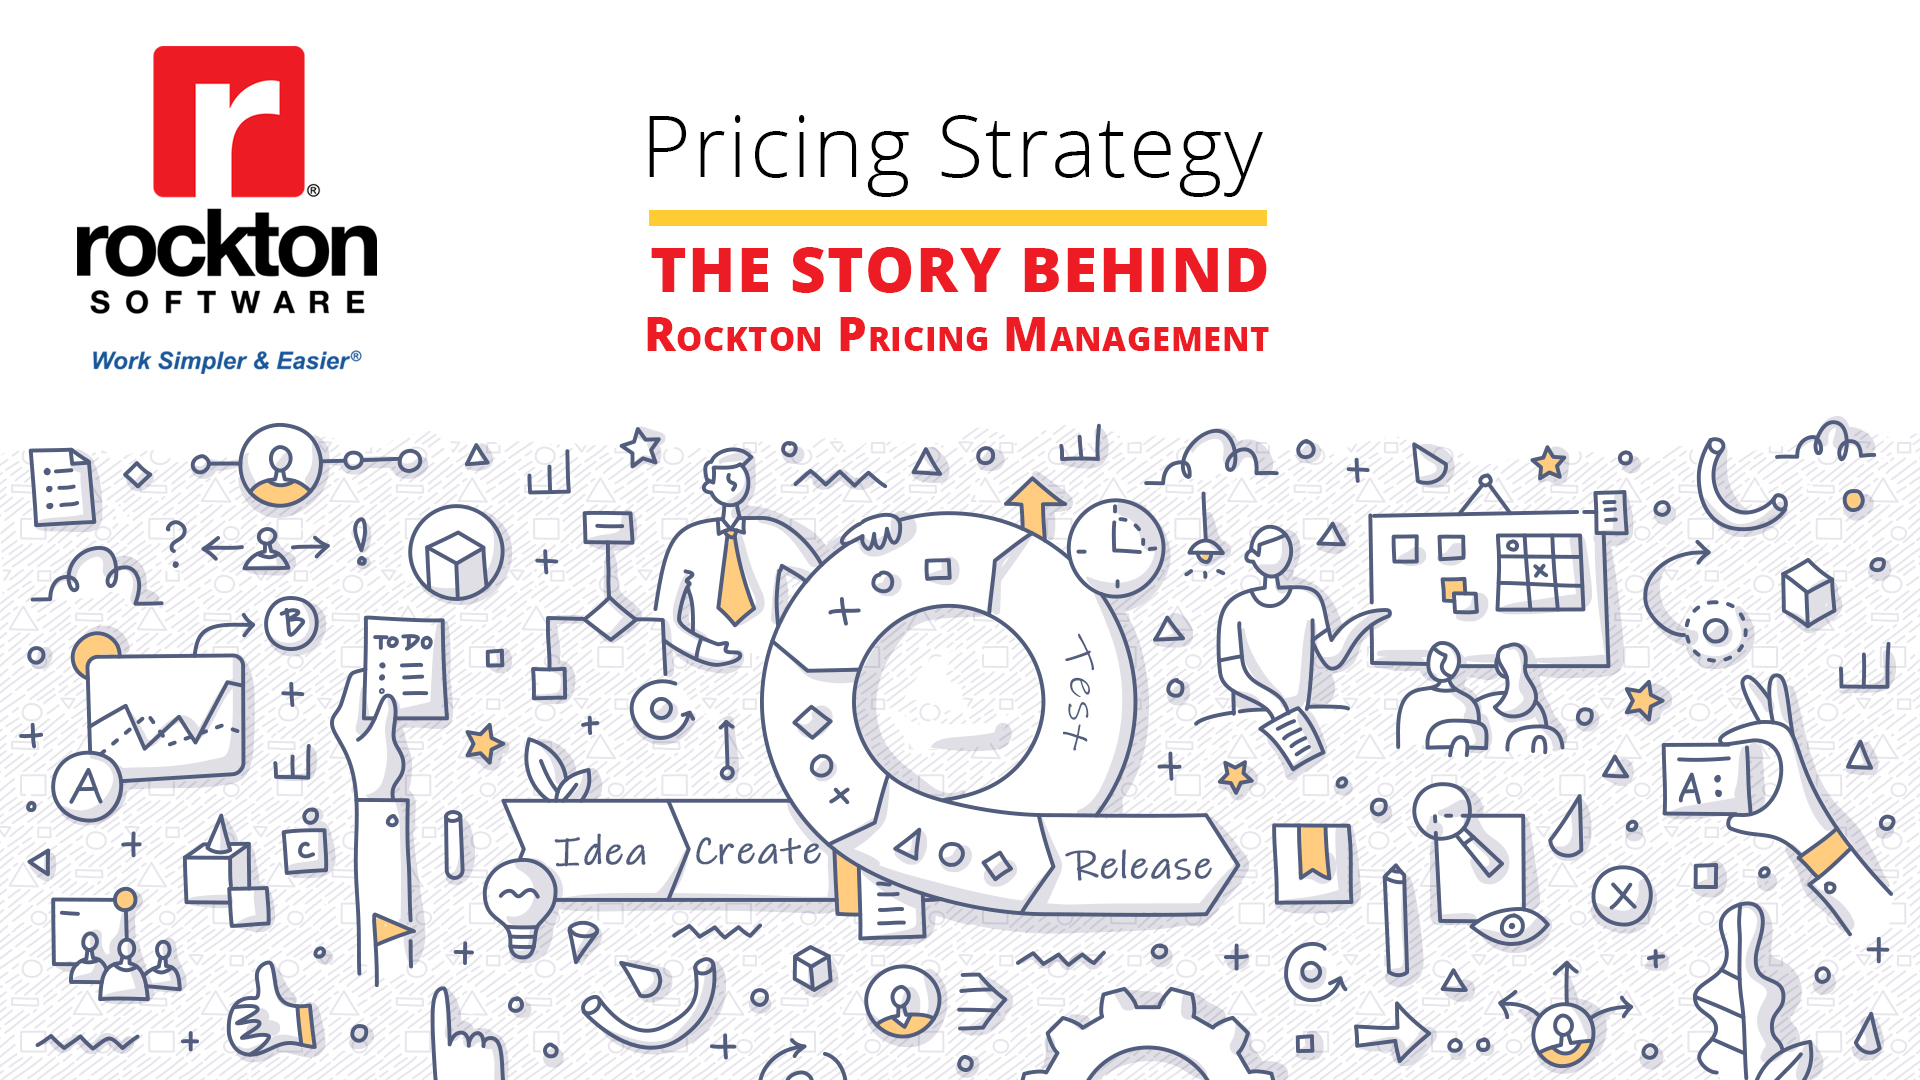 The Story Behind Pricing Revenue Management